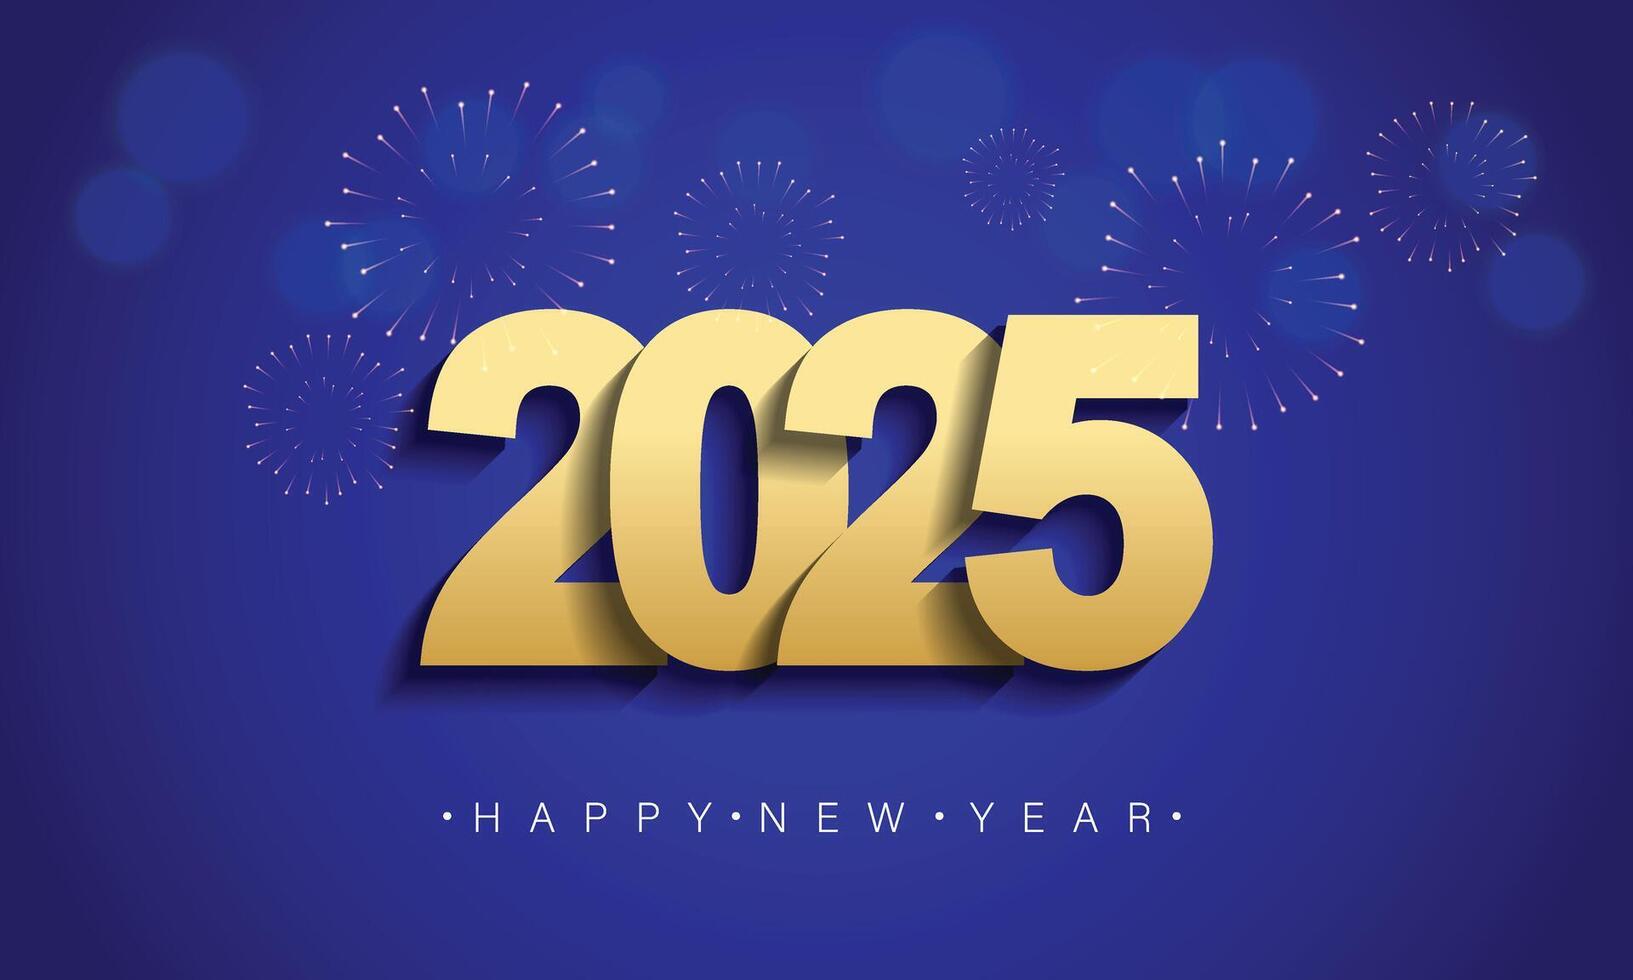 Happy New Year 2025 greeting card design template. vector